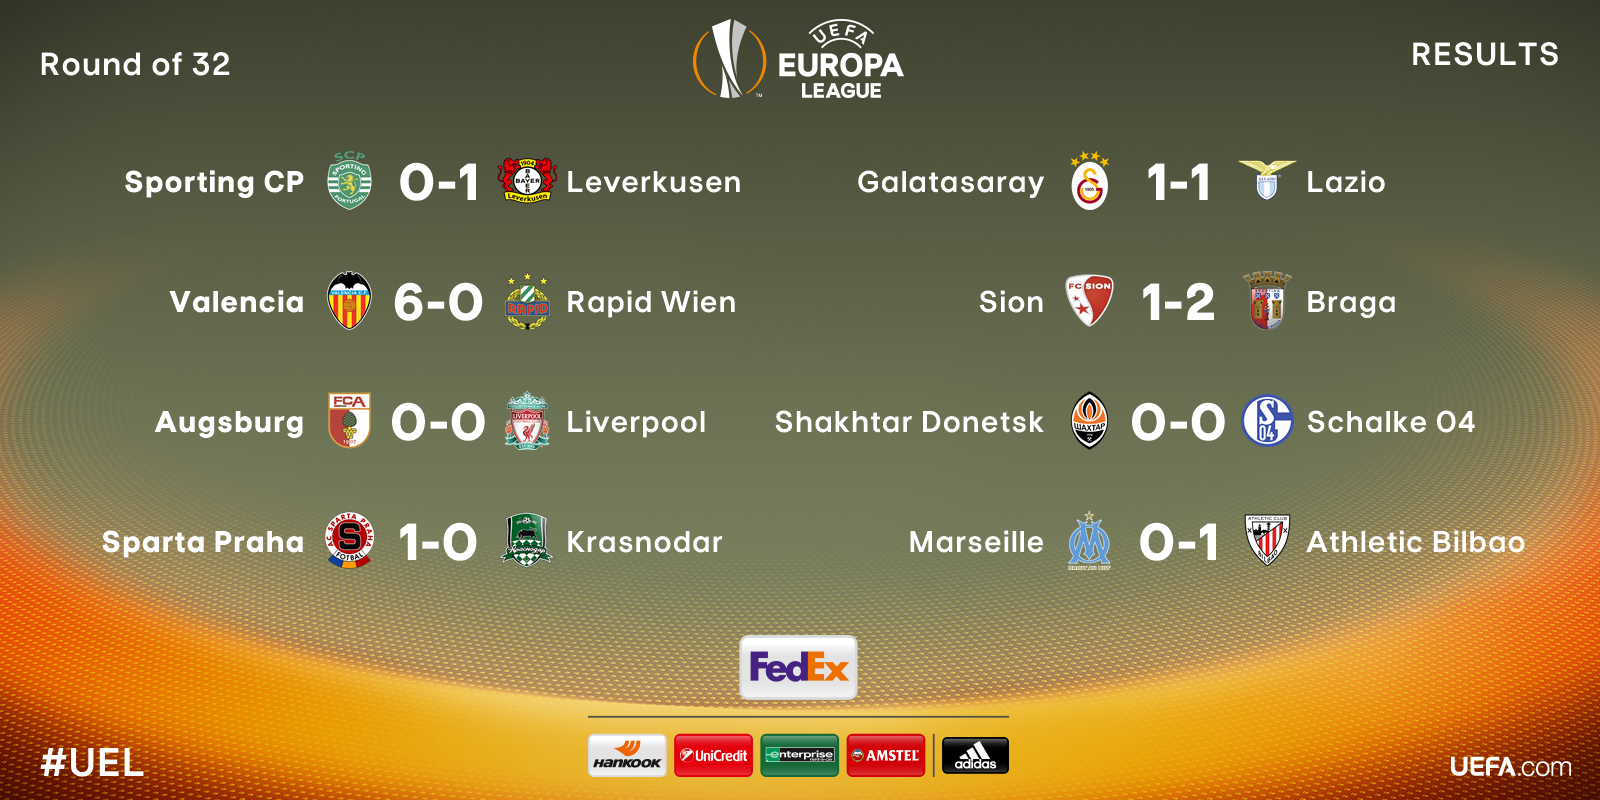 UEFA Europa League on Twitter: "RESULTS Here are the complete results from  all the Round of 32 first legs... #UEL https://t.co/6W594S4qic" / Twitter